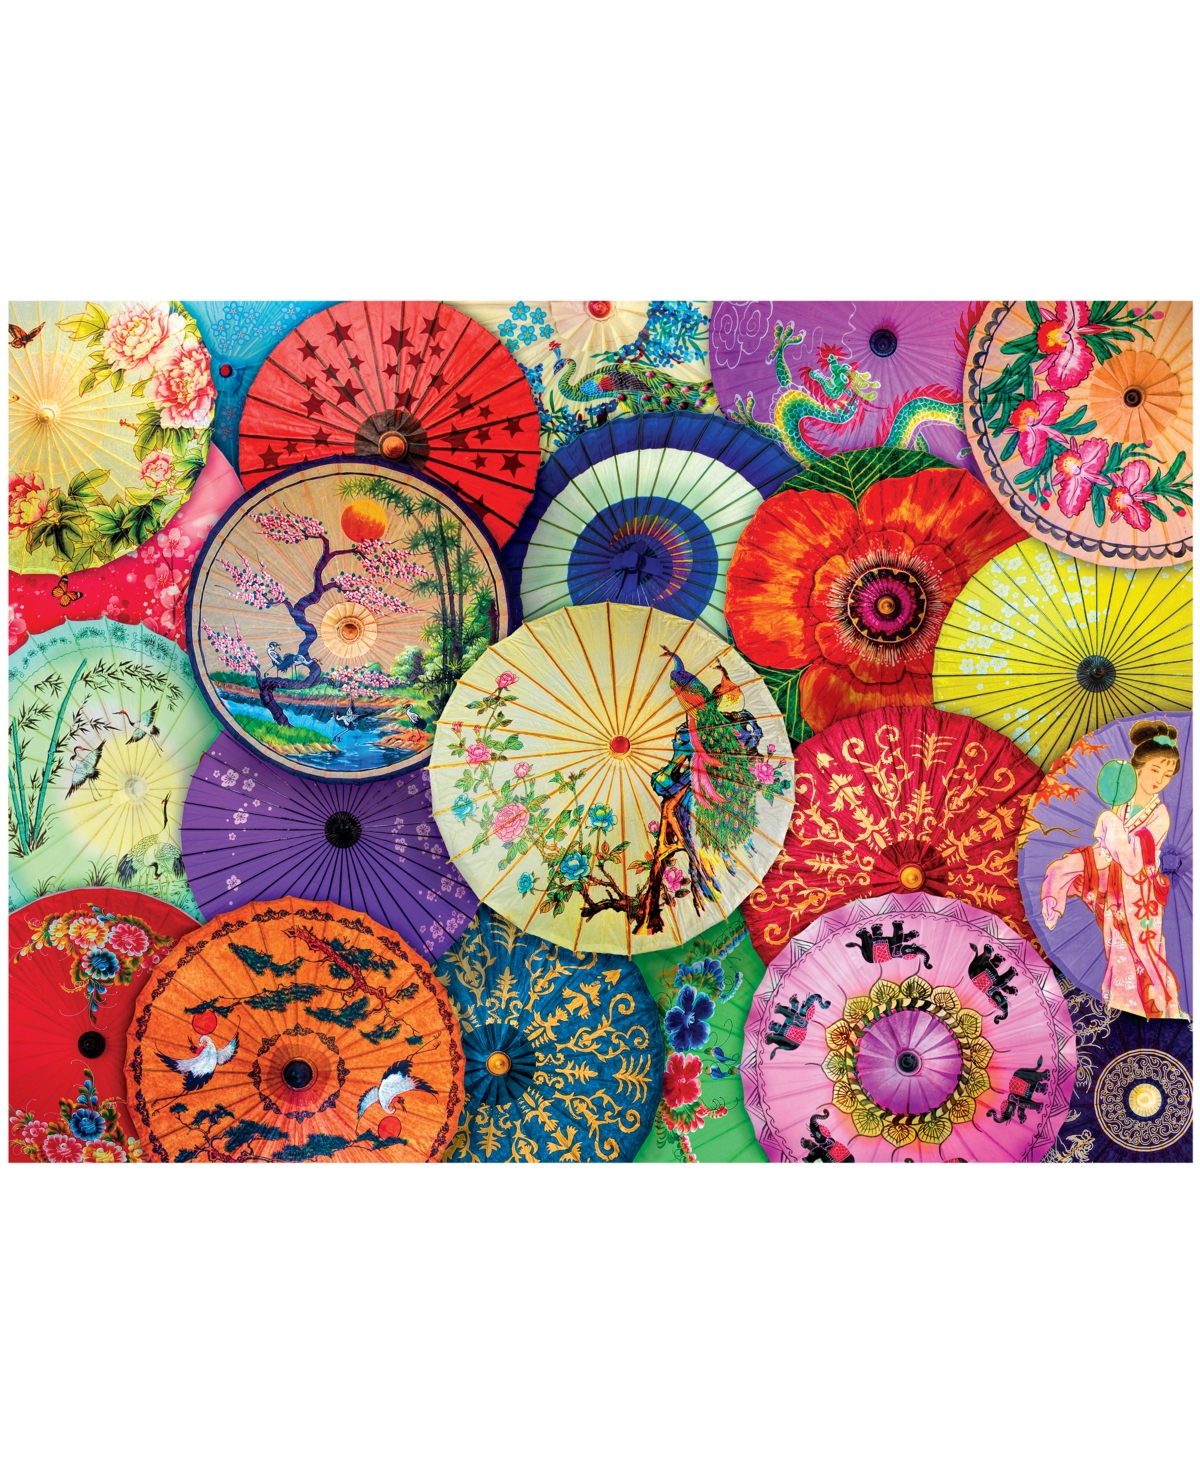 University Games Kids' Eurographics Incorporated Colors Of The World Asian Oil-paper Umbrellas Jigsaw Puzzle, 1000 Pieces In No Color